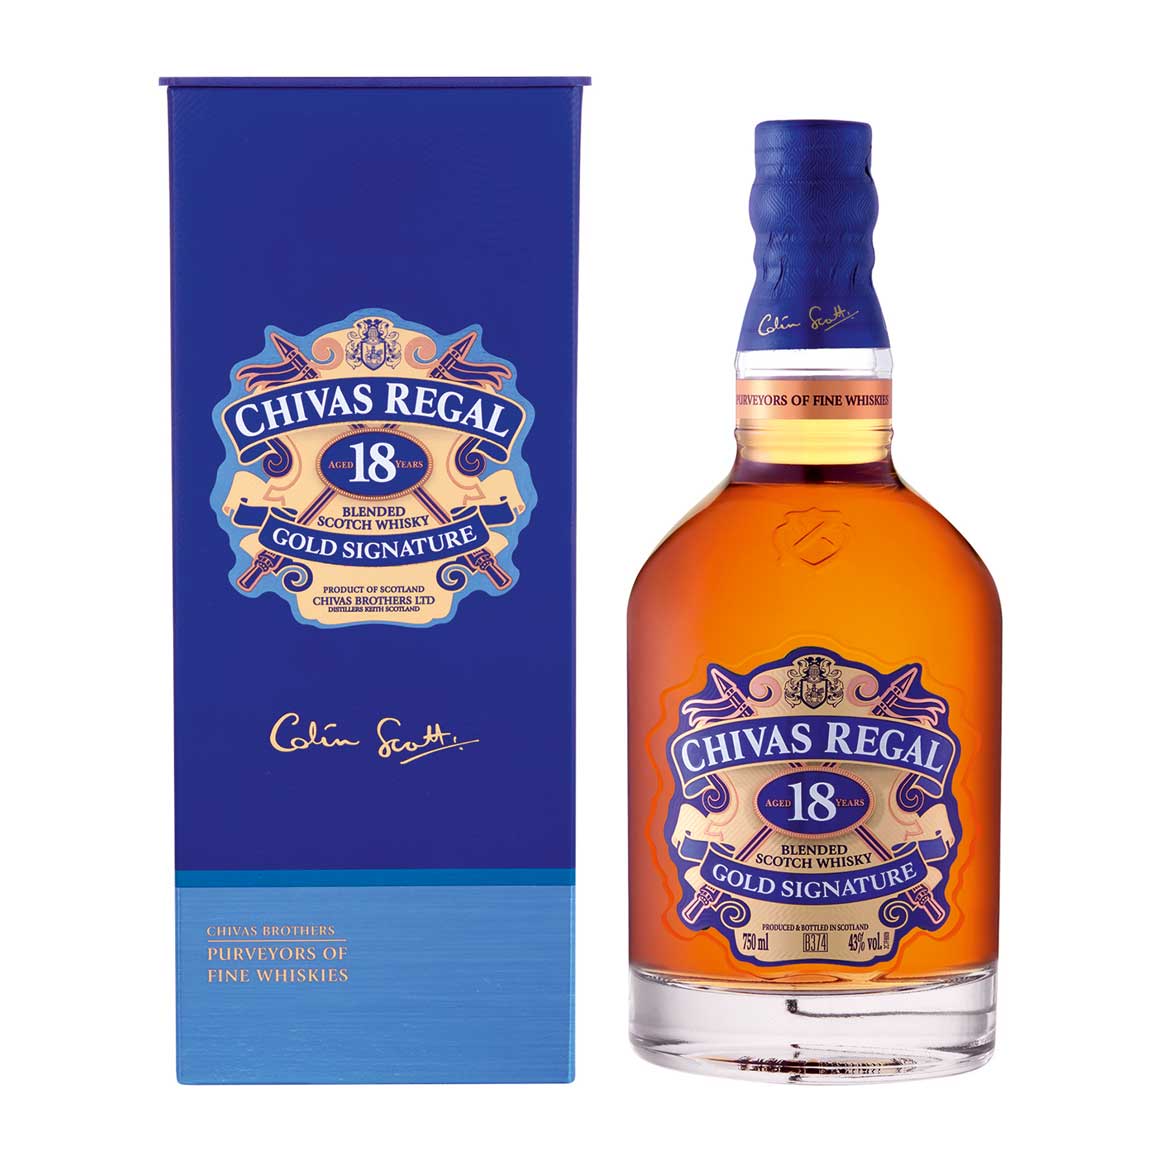 Chivas Regal 18 Year Old Blended Scotch Whisky 750 ml